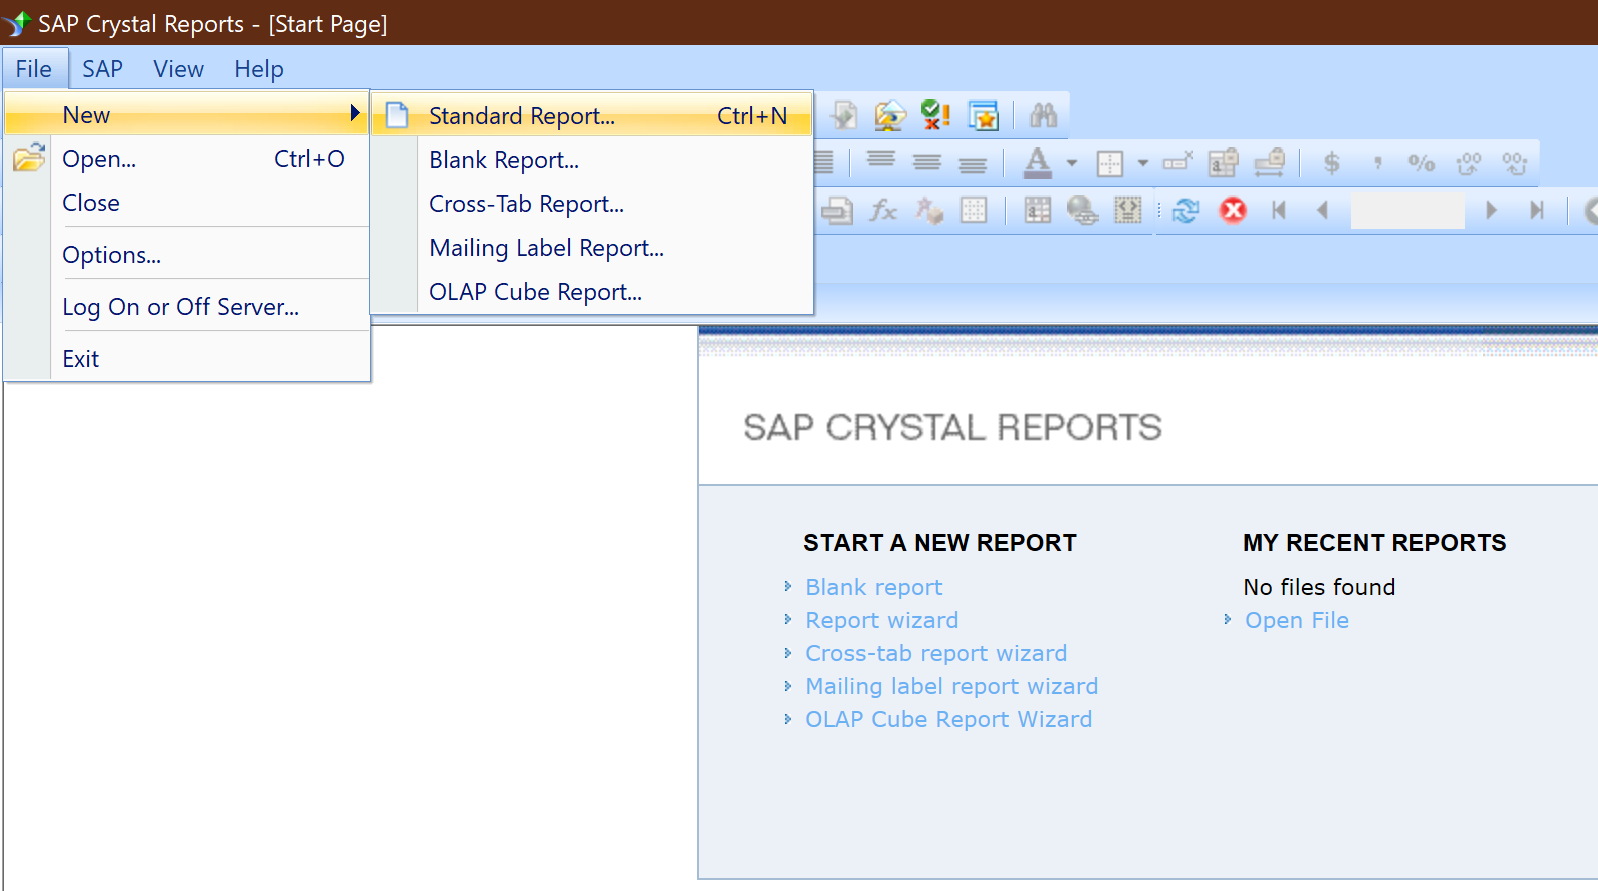 Install the ODBC driver for SAP Crystal Reports